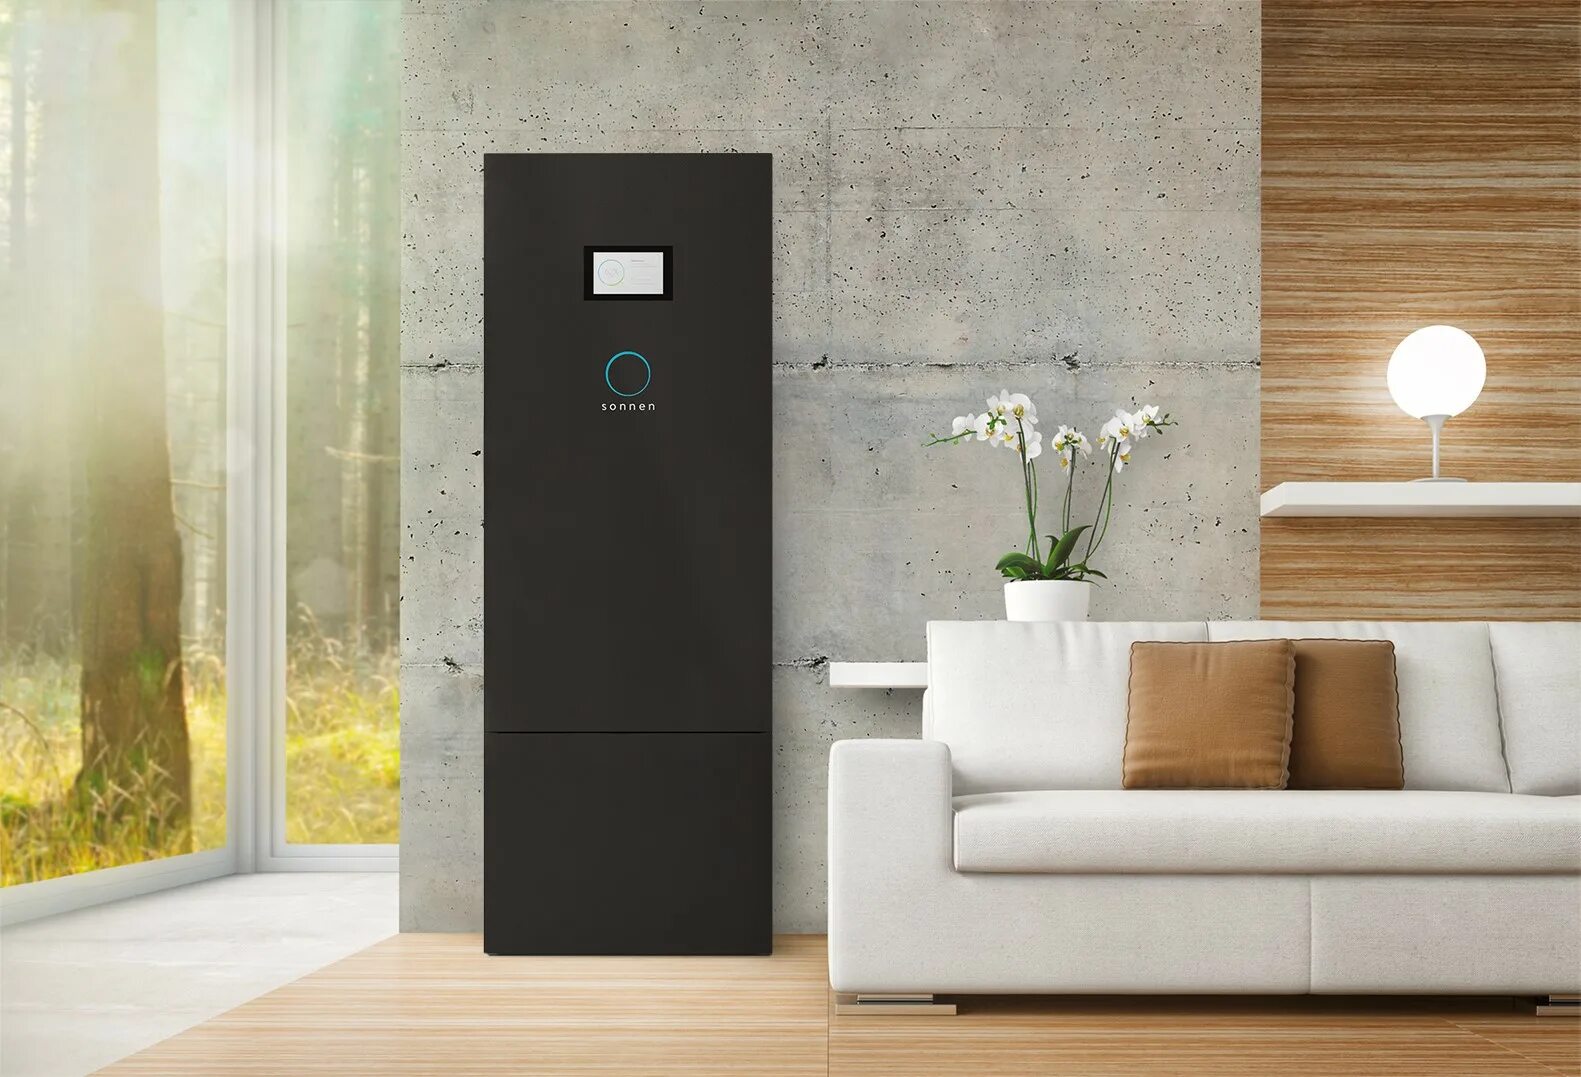 Home battery. Home Energy Storage Battery. Smart Home ev Charger. Home Energy Storage System. Energy Storage at Home.